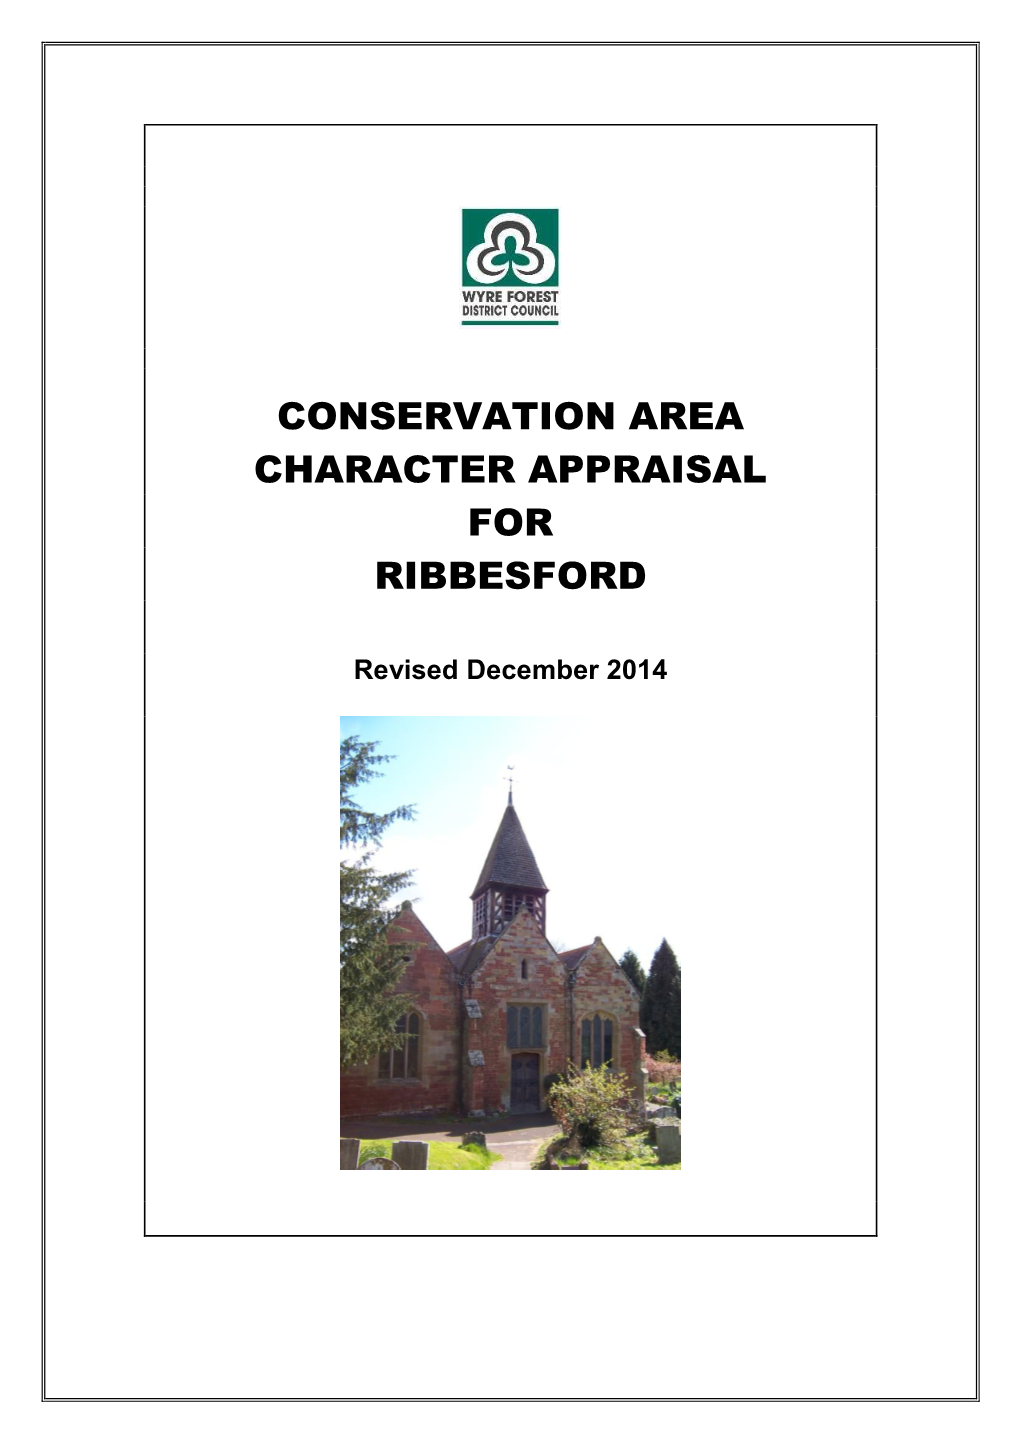 Ribbesford Conservation Area Appraisal